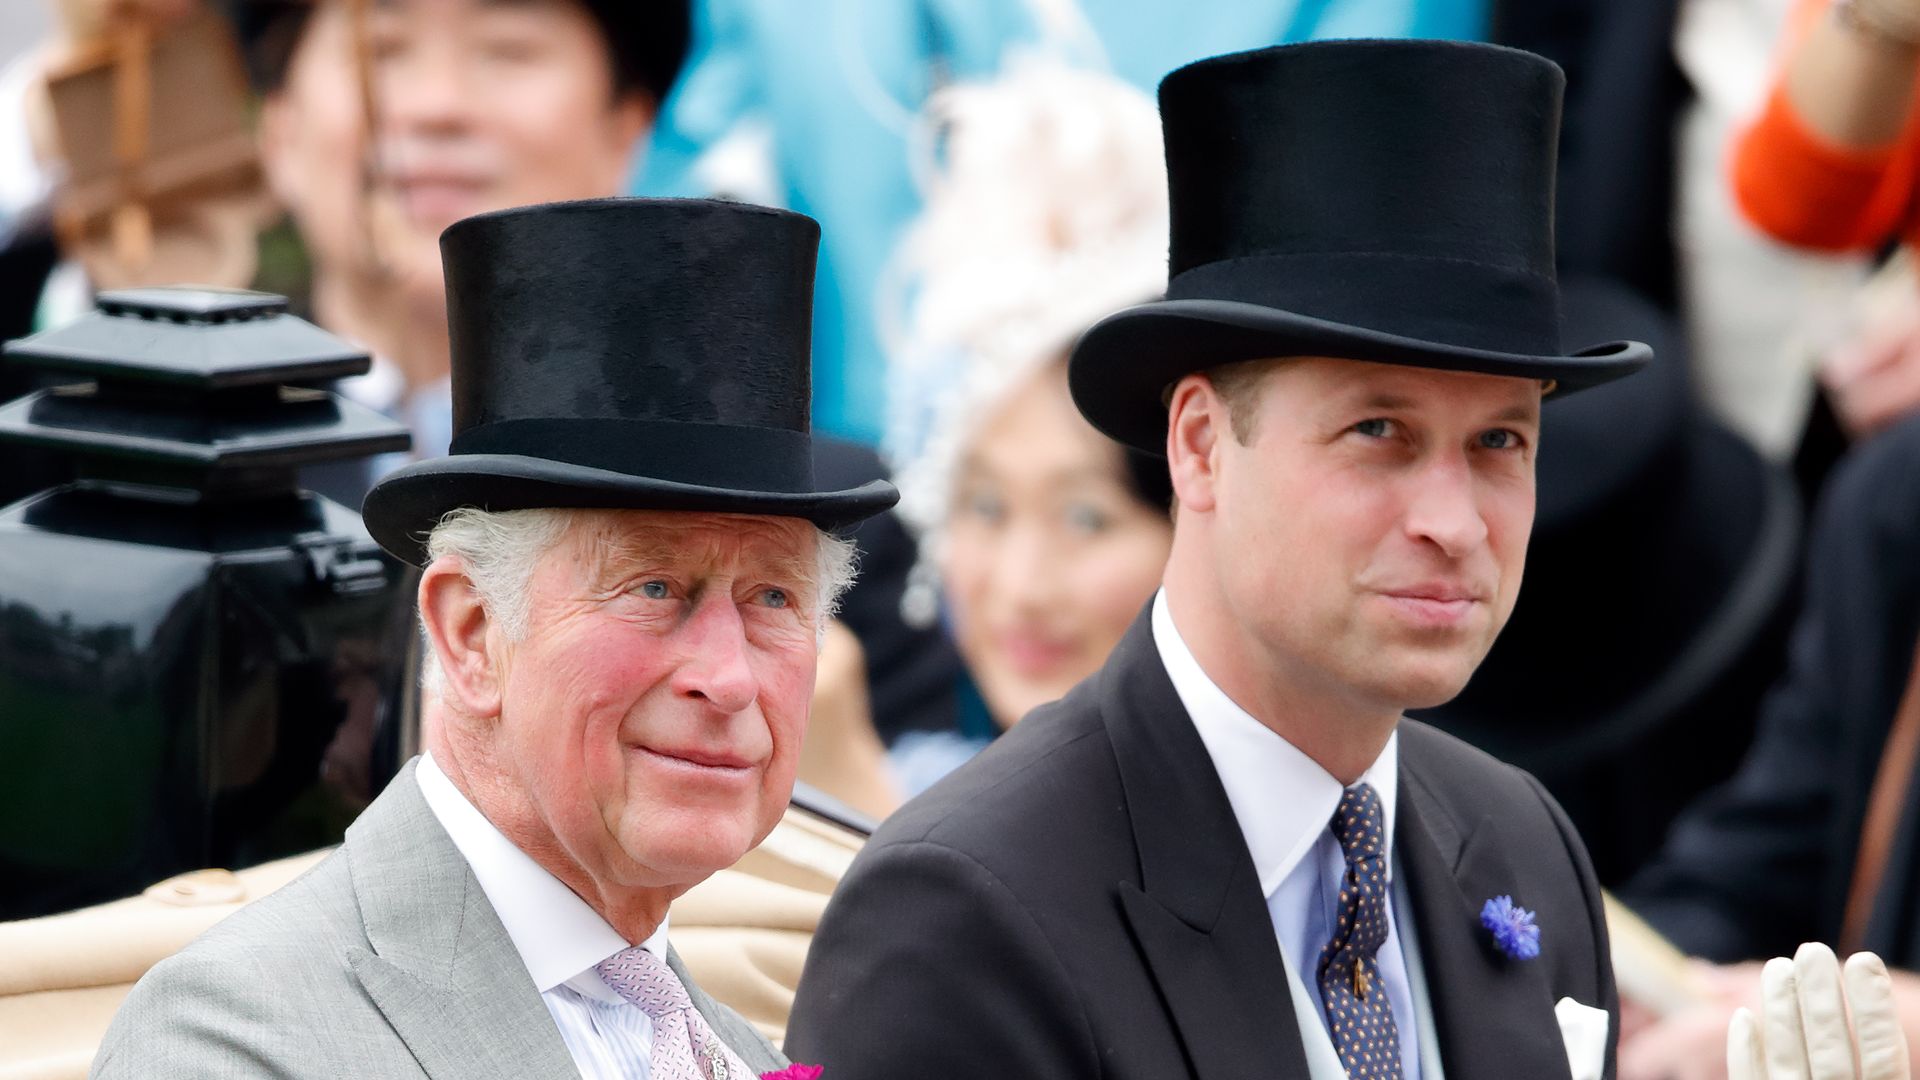 Prince Charles, Prince of Wales and Prince William, Duke of Cambridge attend day one of Royal Ascot at Ascot Racecourse on June 18, 2019 in Ascot, England. 